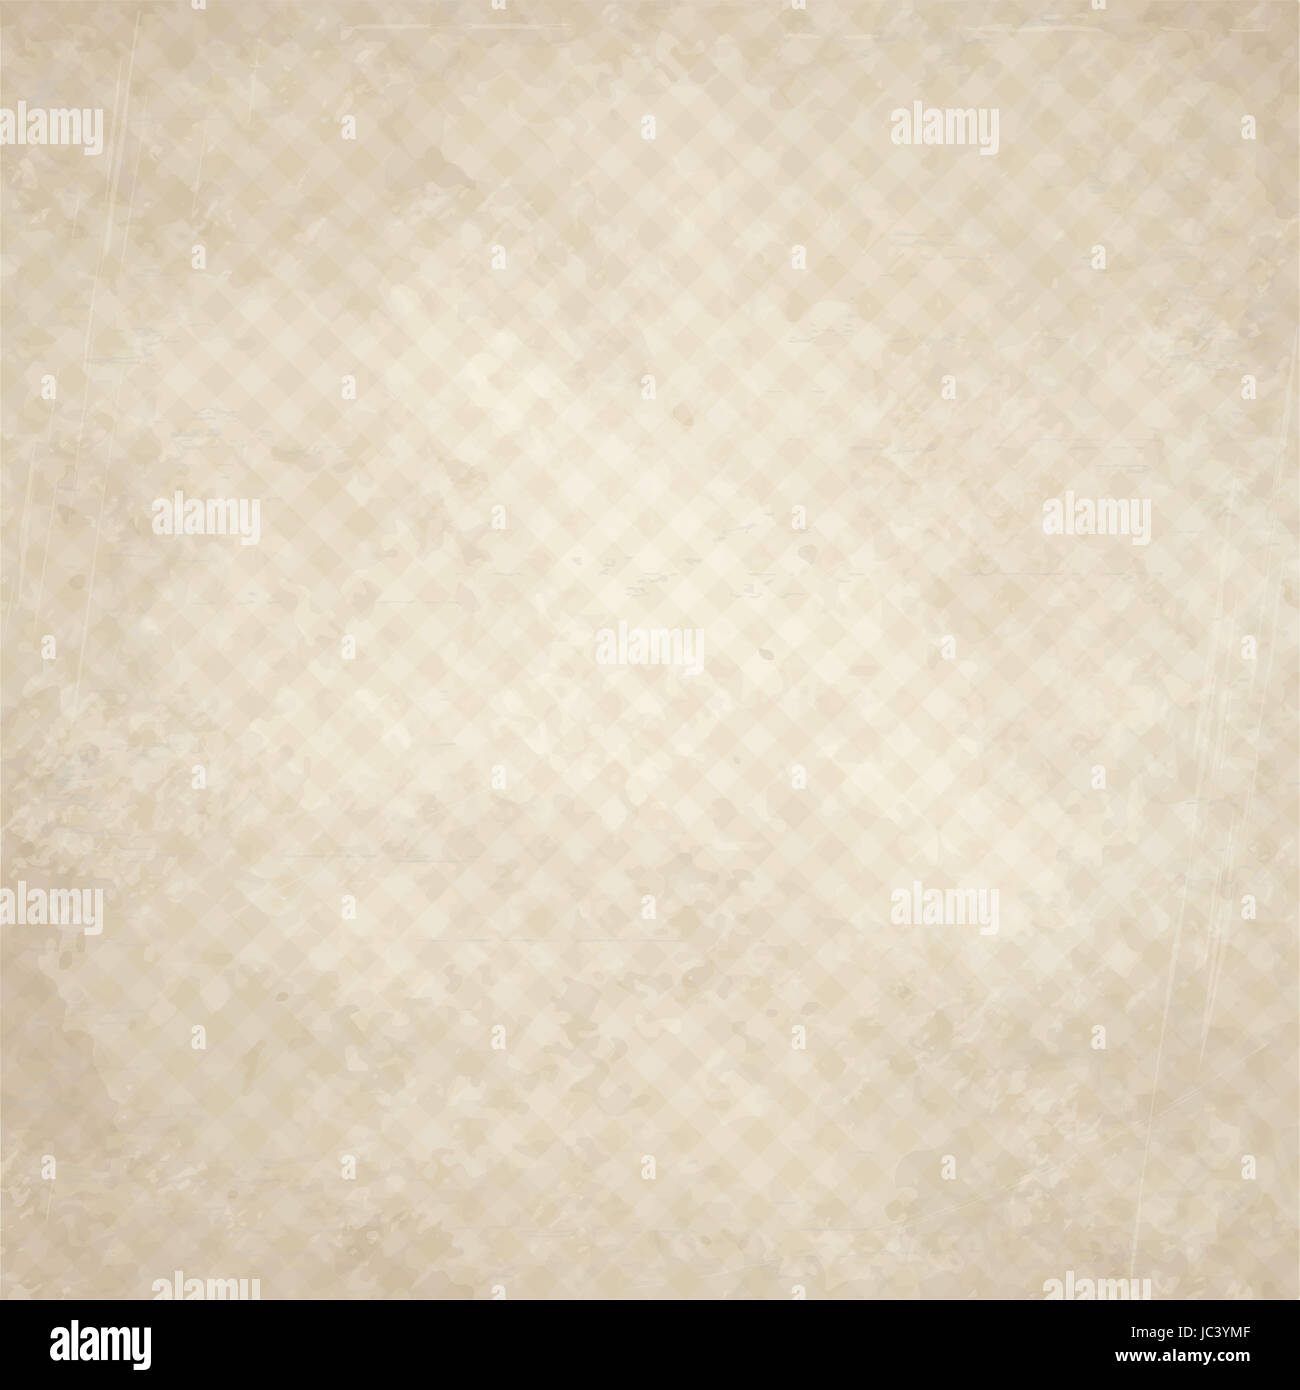 vector of old vintage paper background with checkered pattern Stock Photo